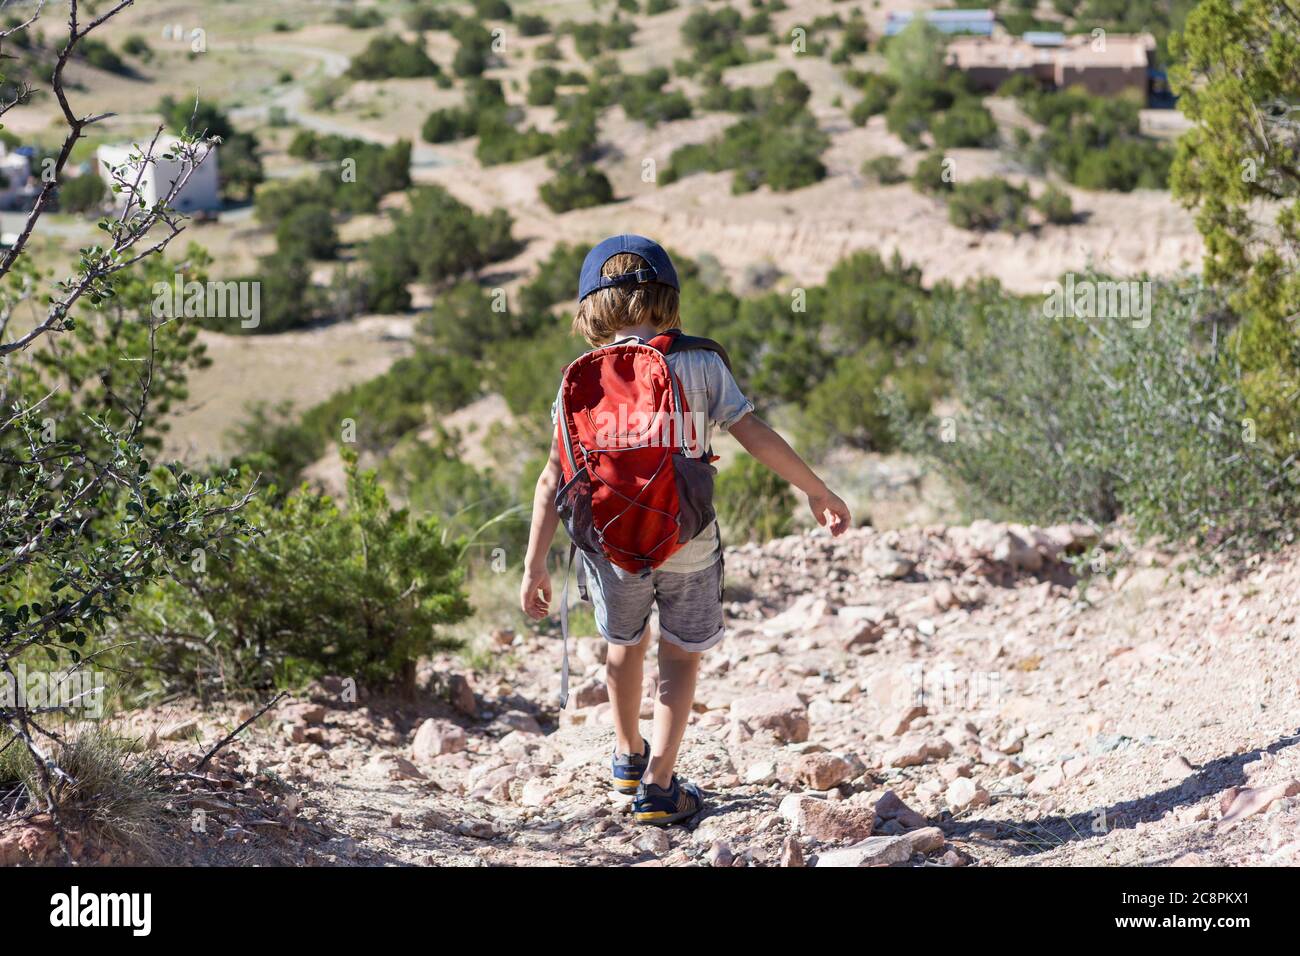 4 year old boy hiking in rural landscape, Lamy, NM. Stock Photo